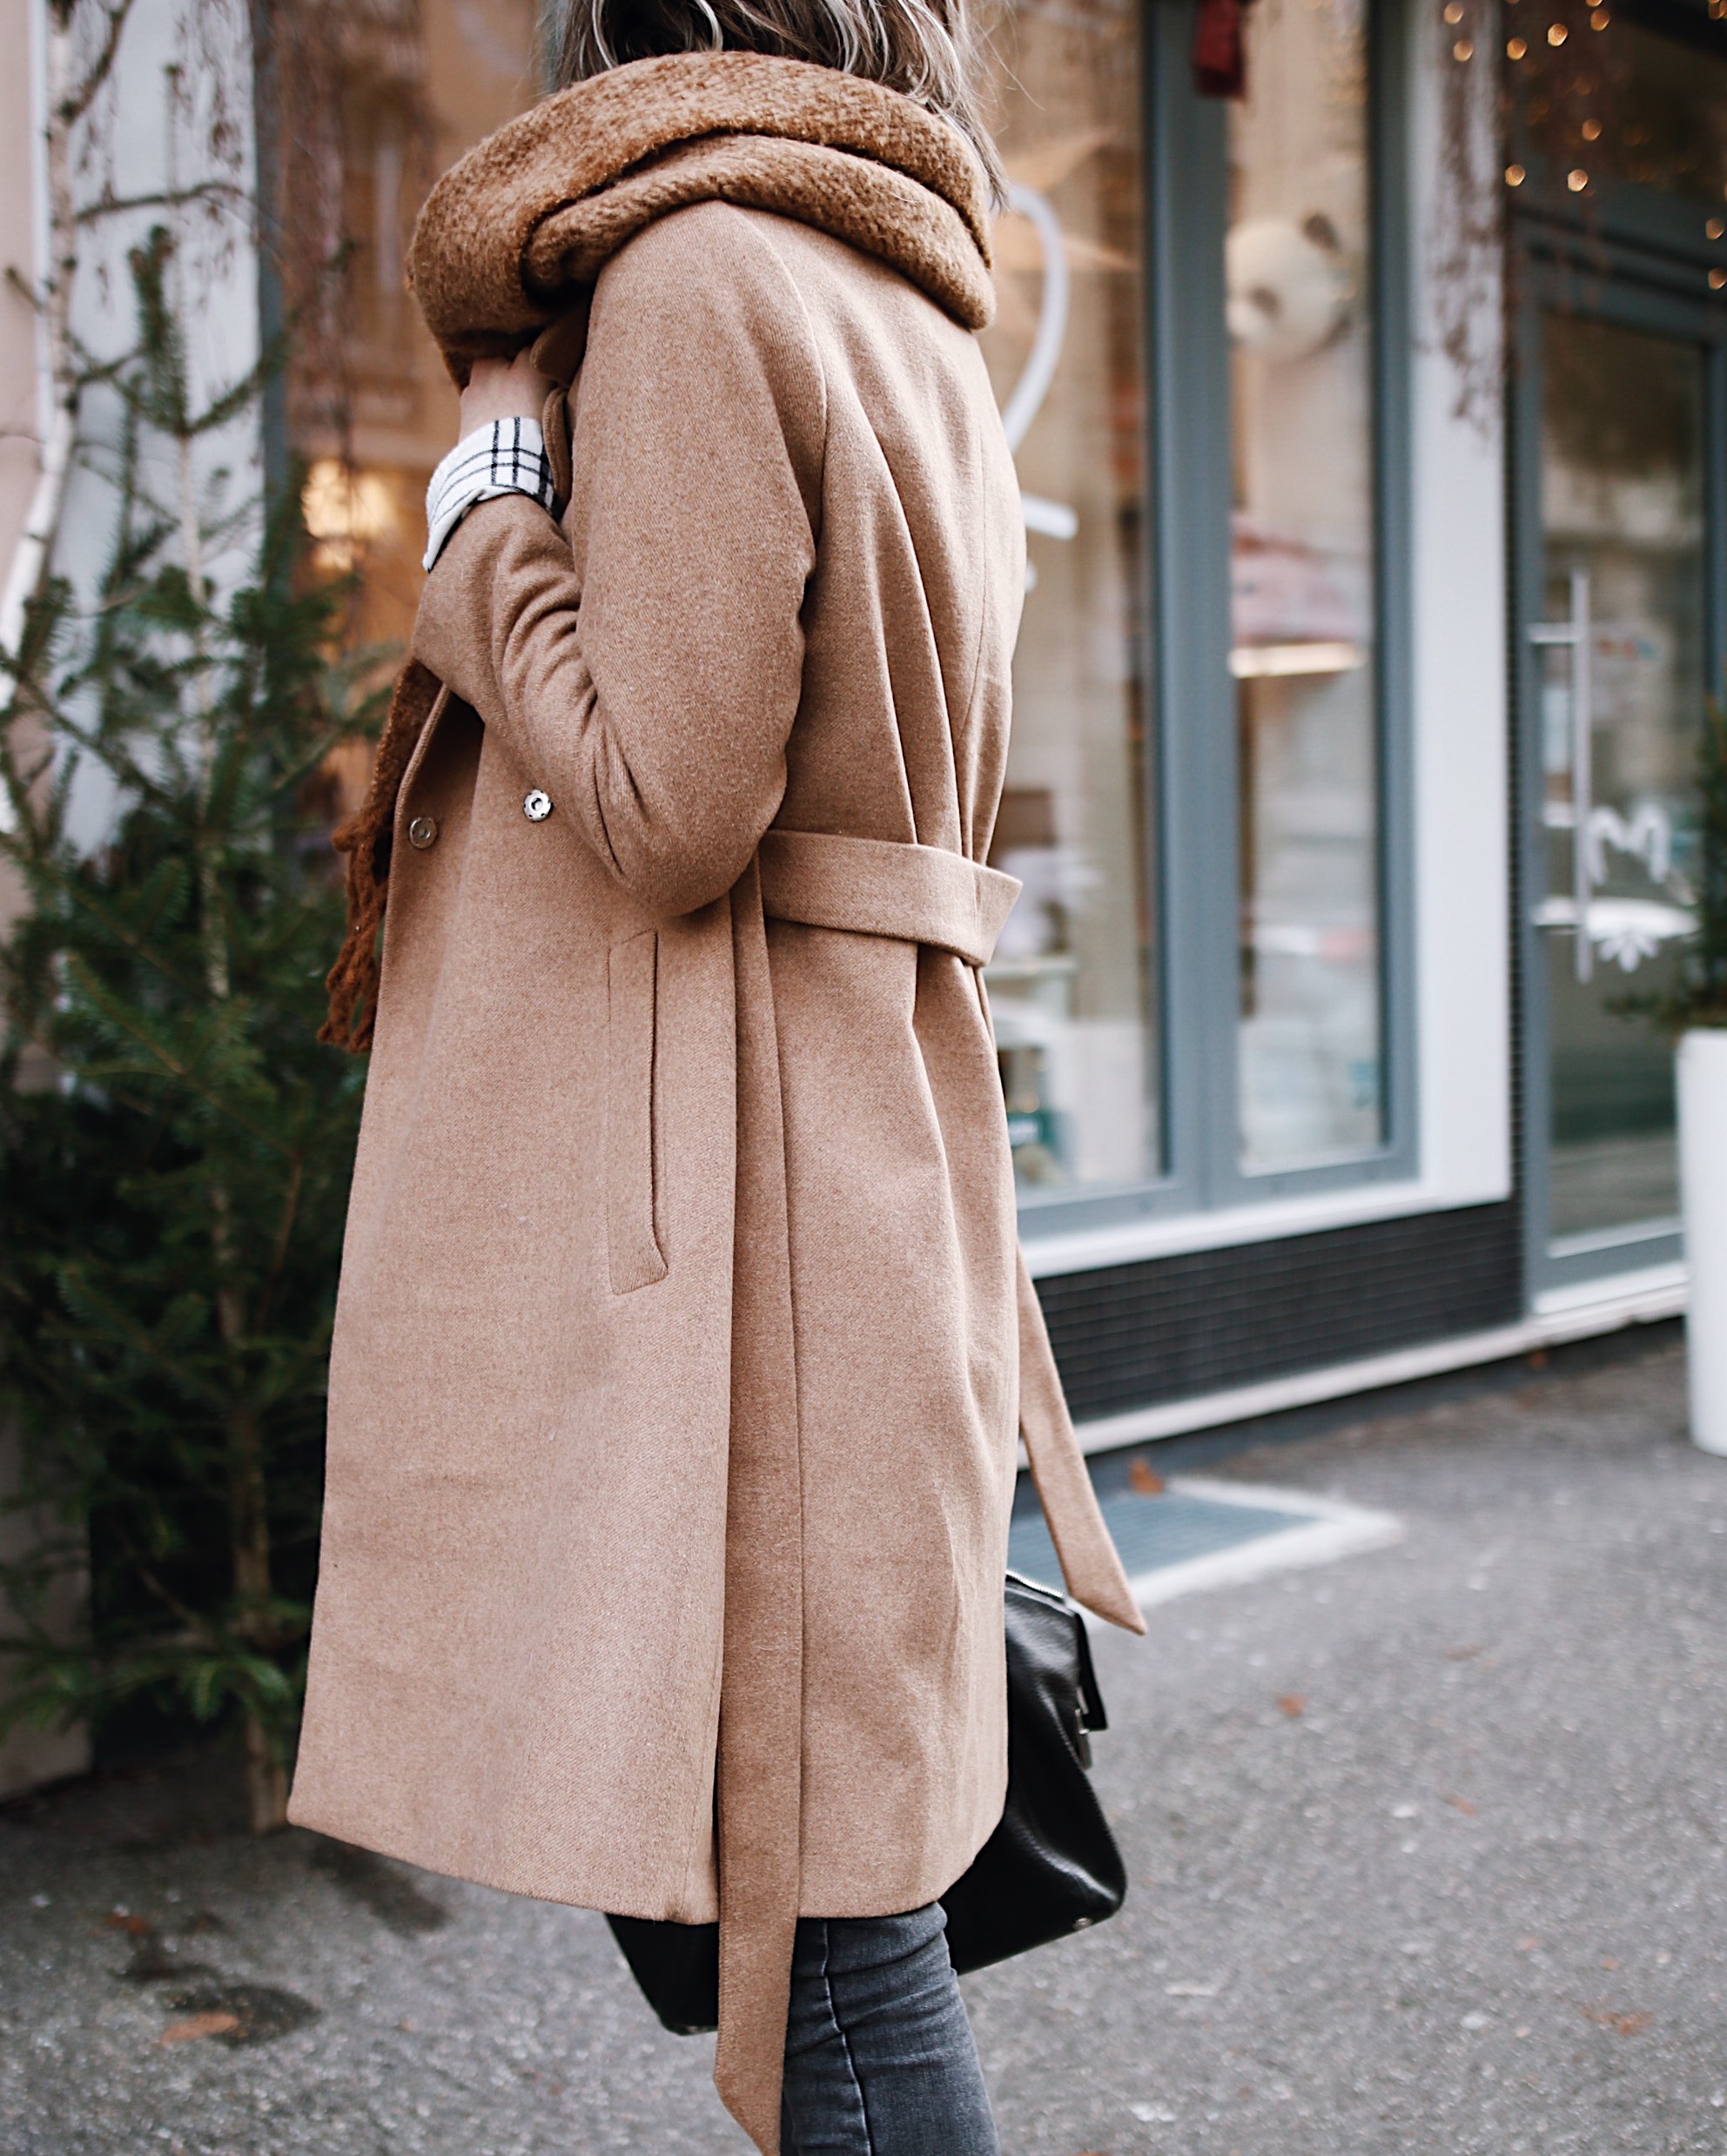 camel coat and winter style